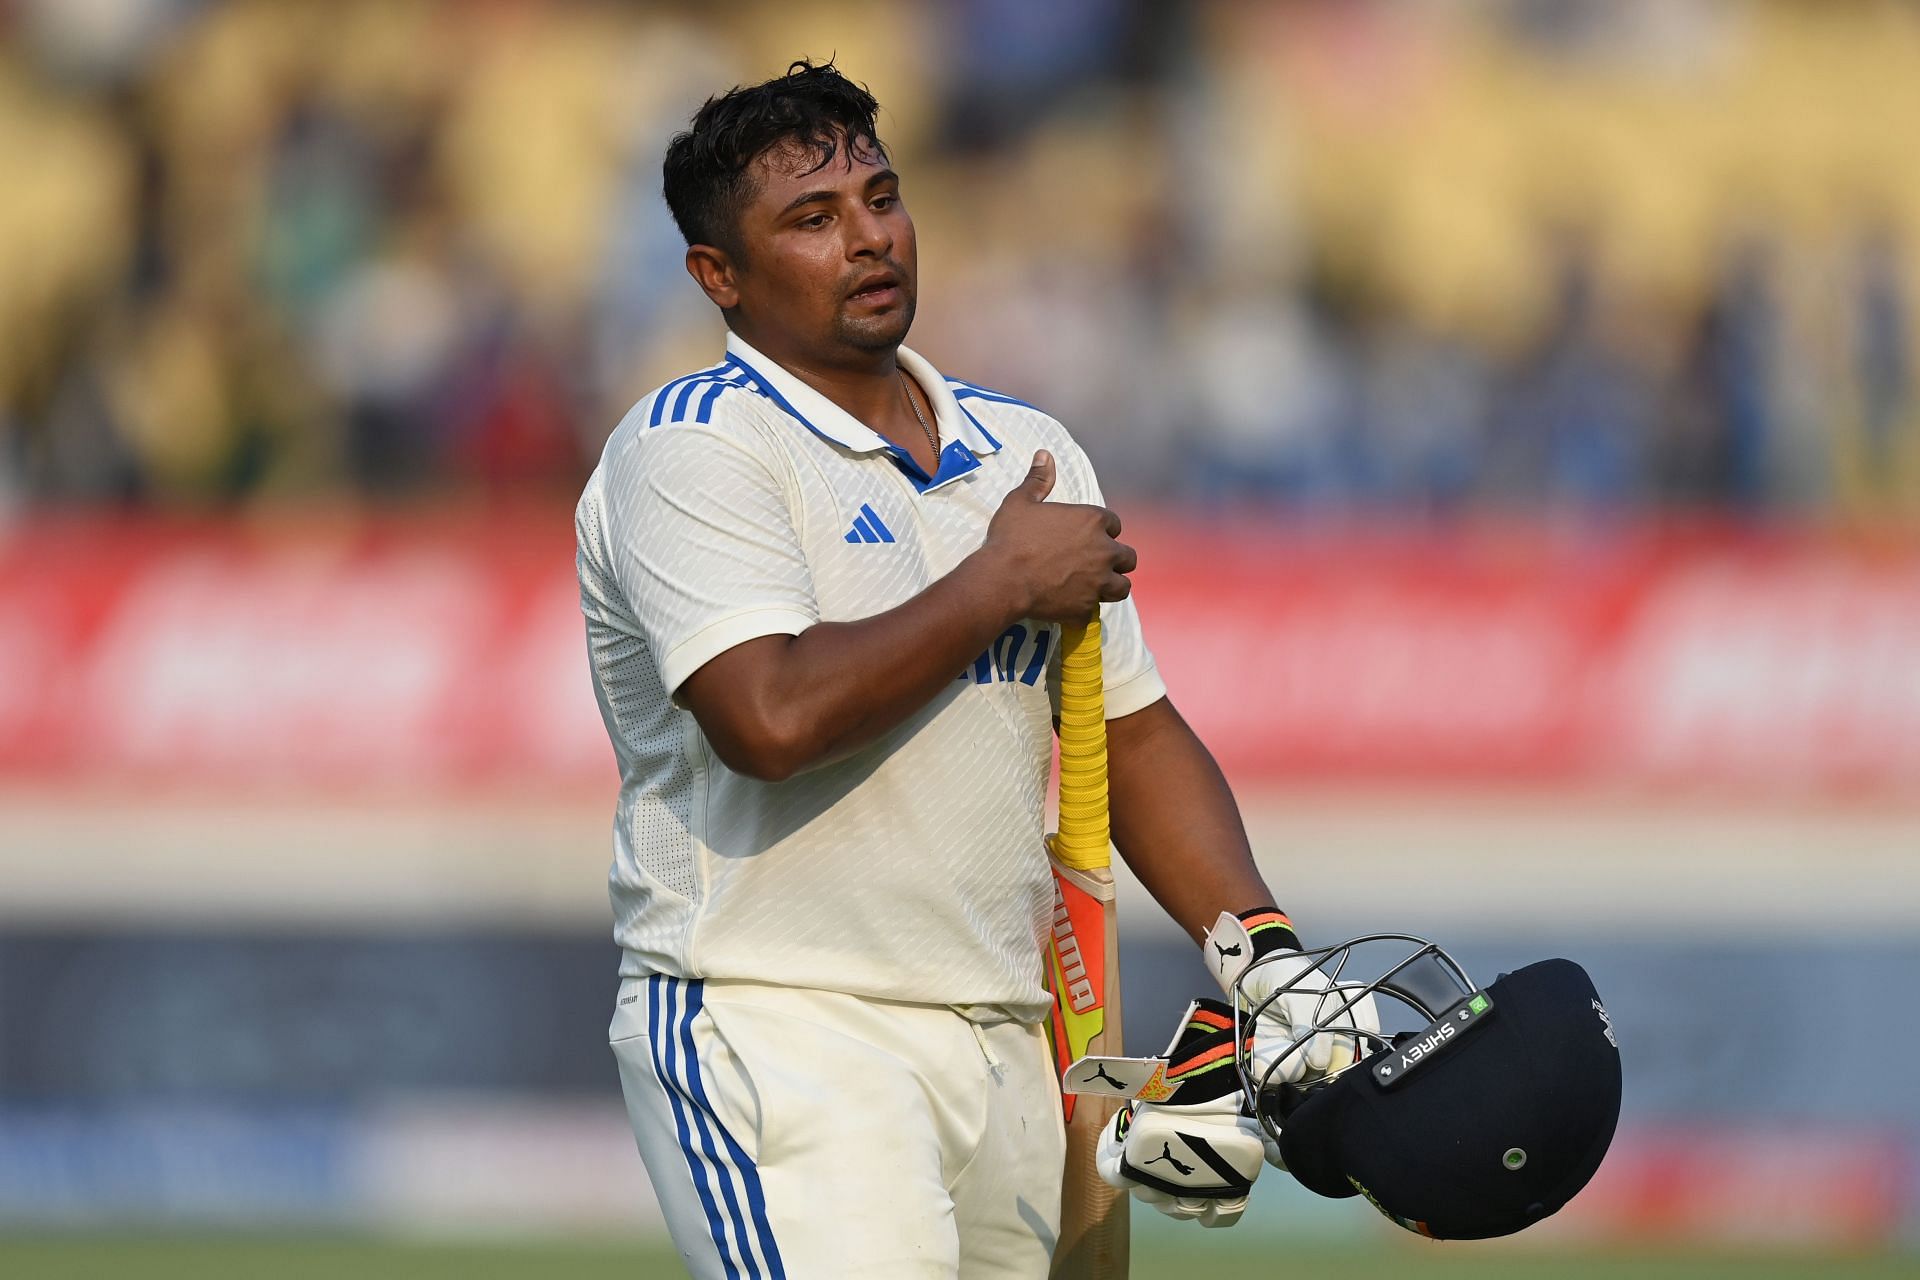 A dejected Sarfaraz Khan walks back after being run out in the Rajkot Test. (Pic: Getty Images)